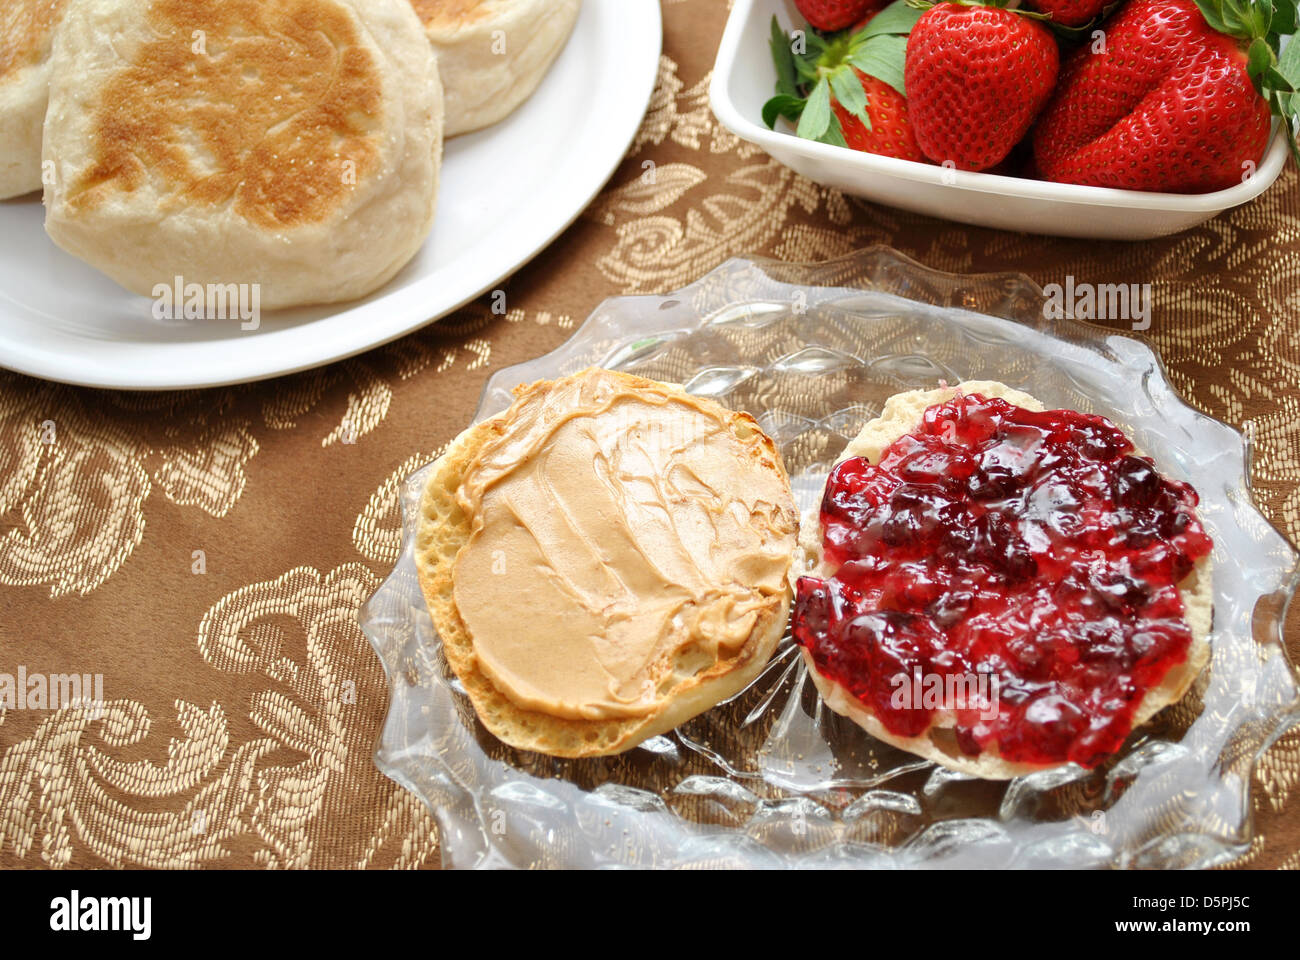 Peanut and Jelly English Muffin with Strawberries Stock Photo